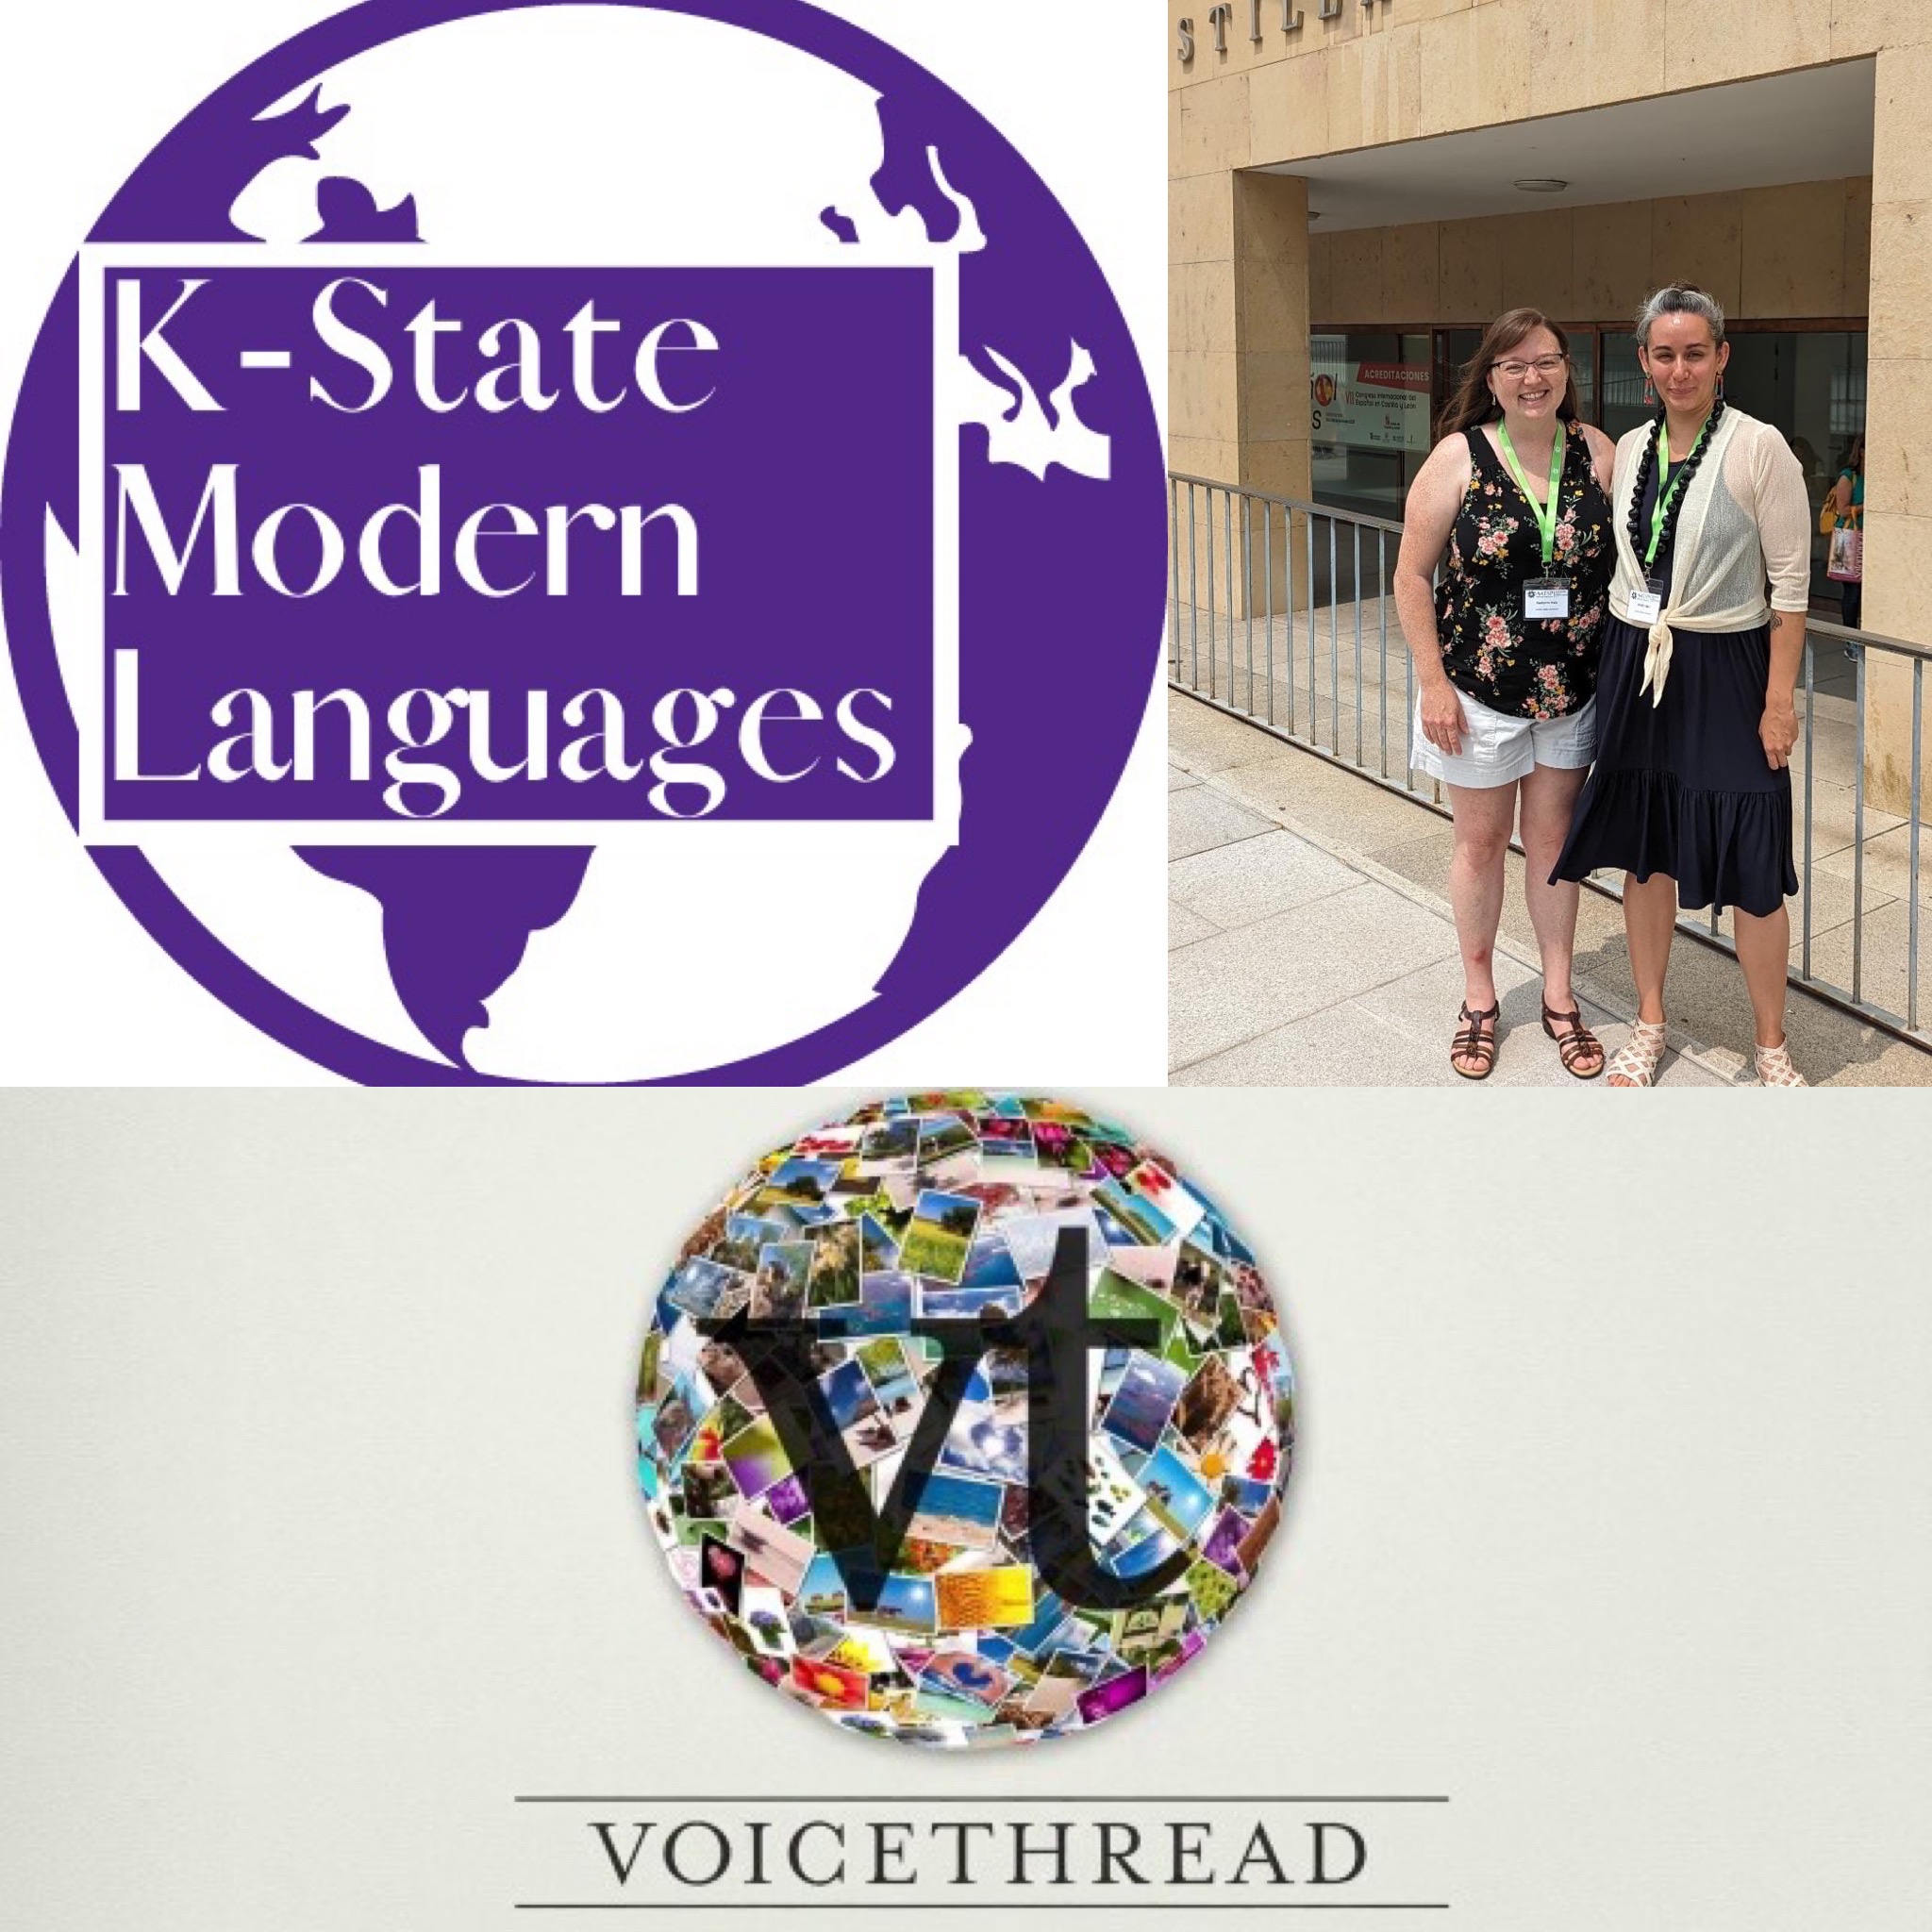 K-State Modern Languages Logo, VoiceThread Logo, and Photo of Dr. Raelynne M. Hale and Dr. Andrea Faber.